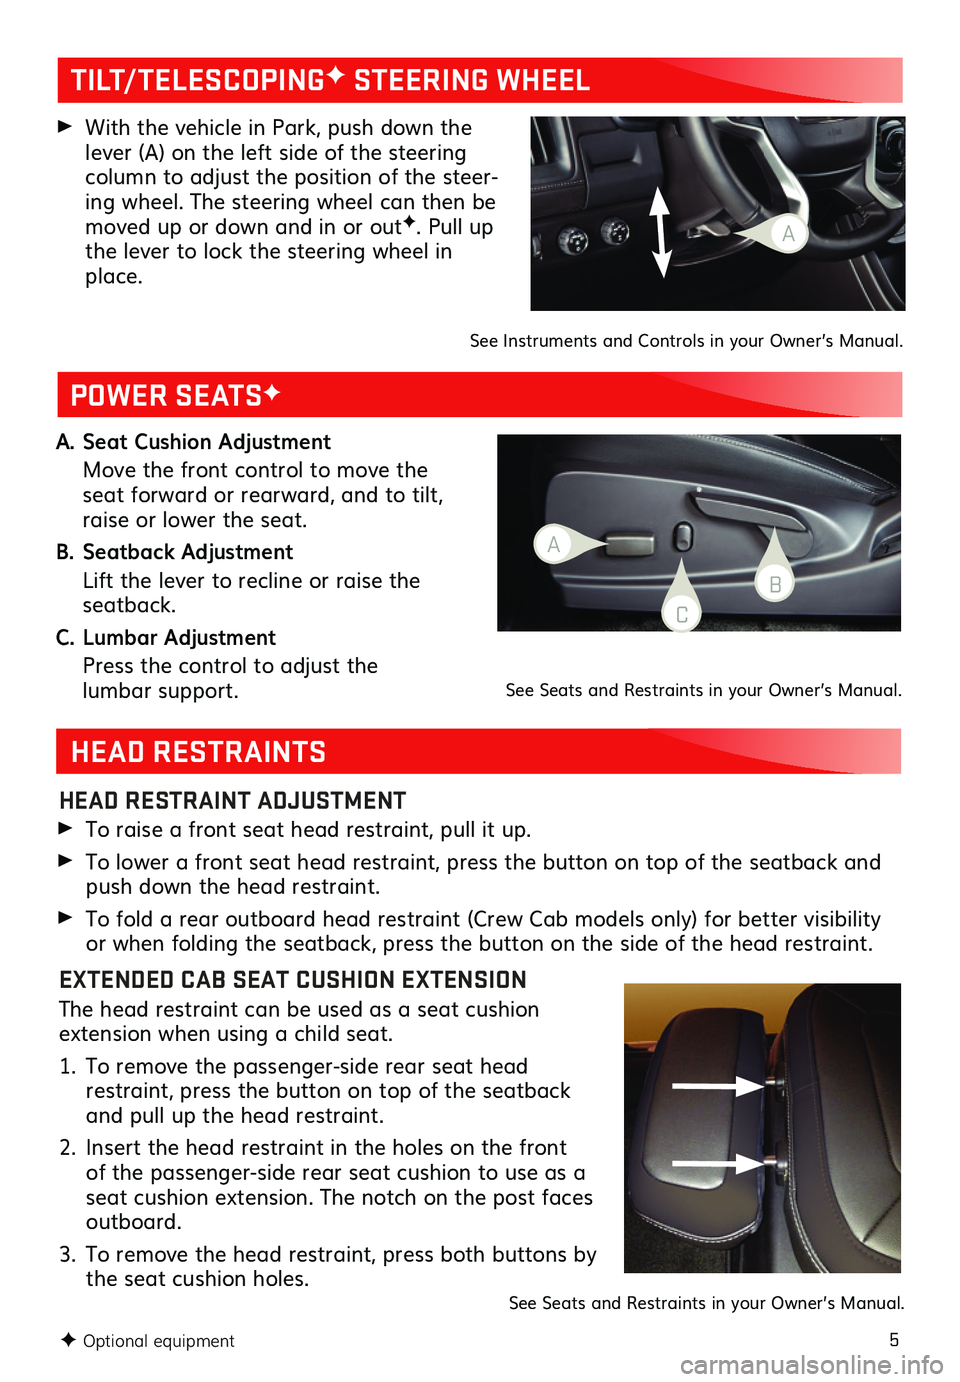 GMC CANYON 2021  Get To Know Guide 5
A. Seat Cushion Adjustment
 Move the front control to move the seat forward or rearward, and to tilt, raise or lower the seat.
B. Seatback Adjustment
 Lift the lever to recline or raise the  seatbac